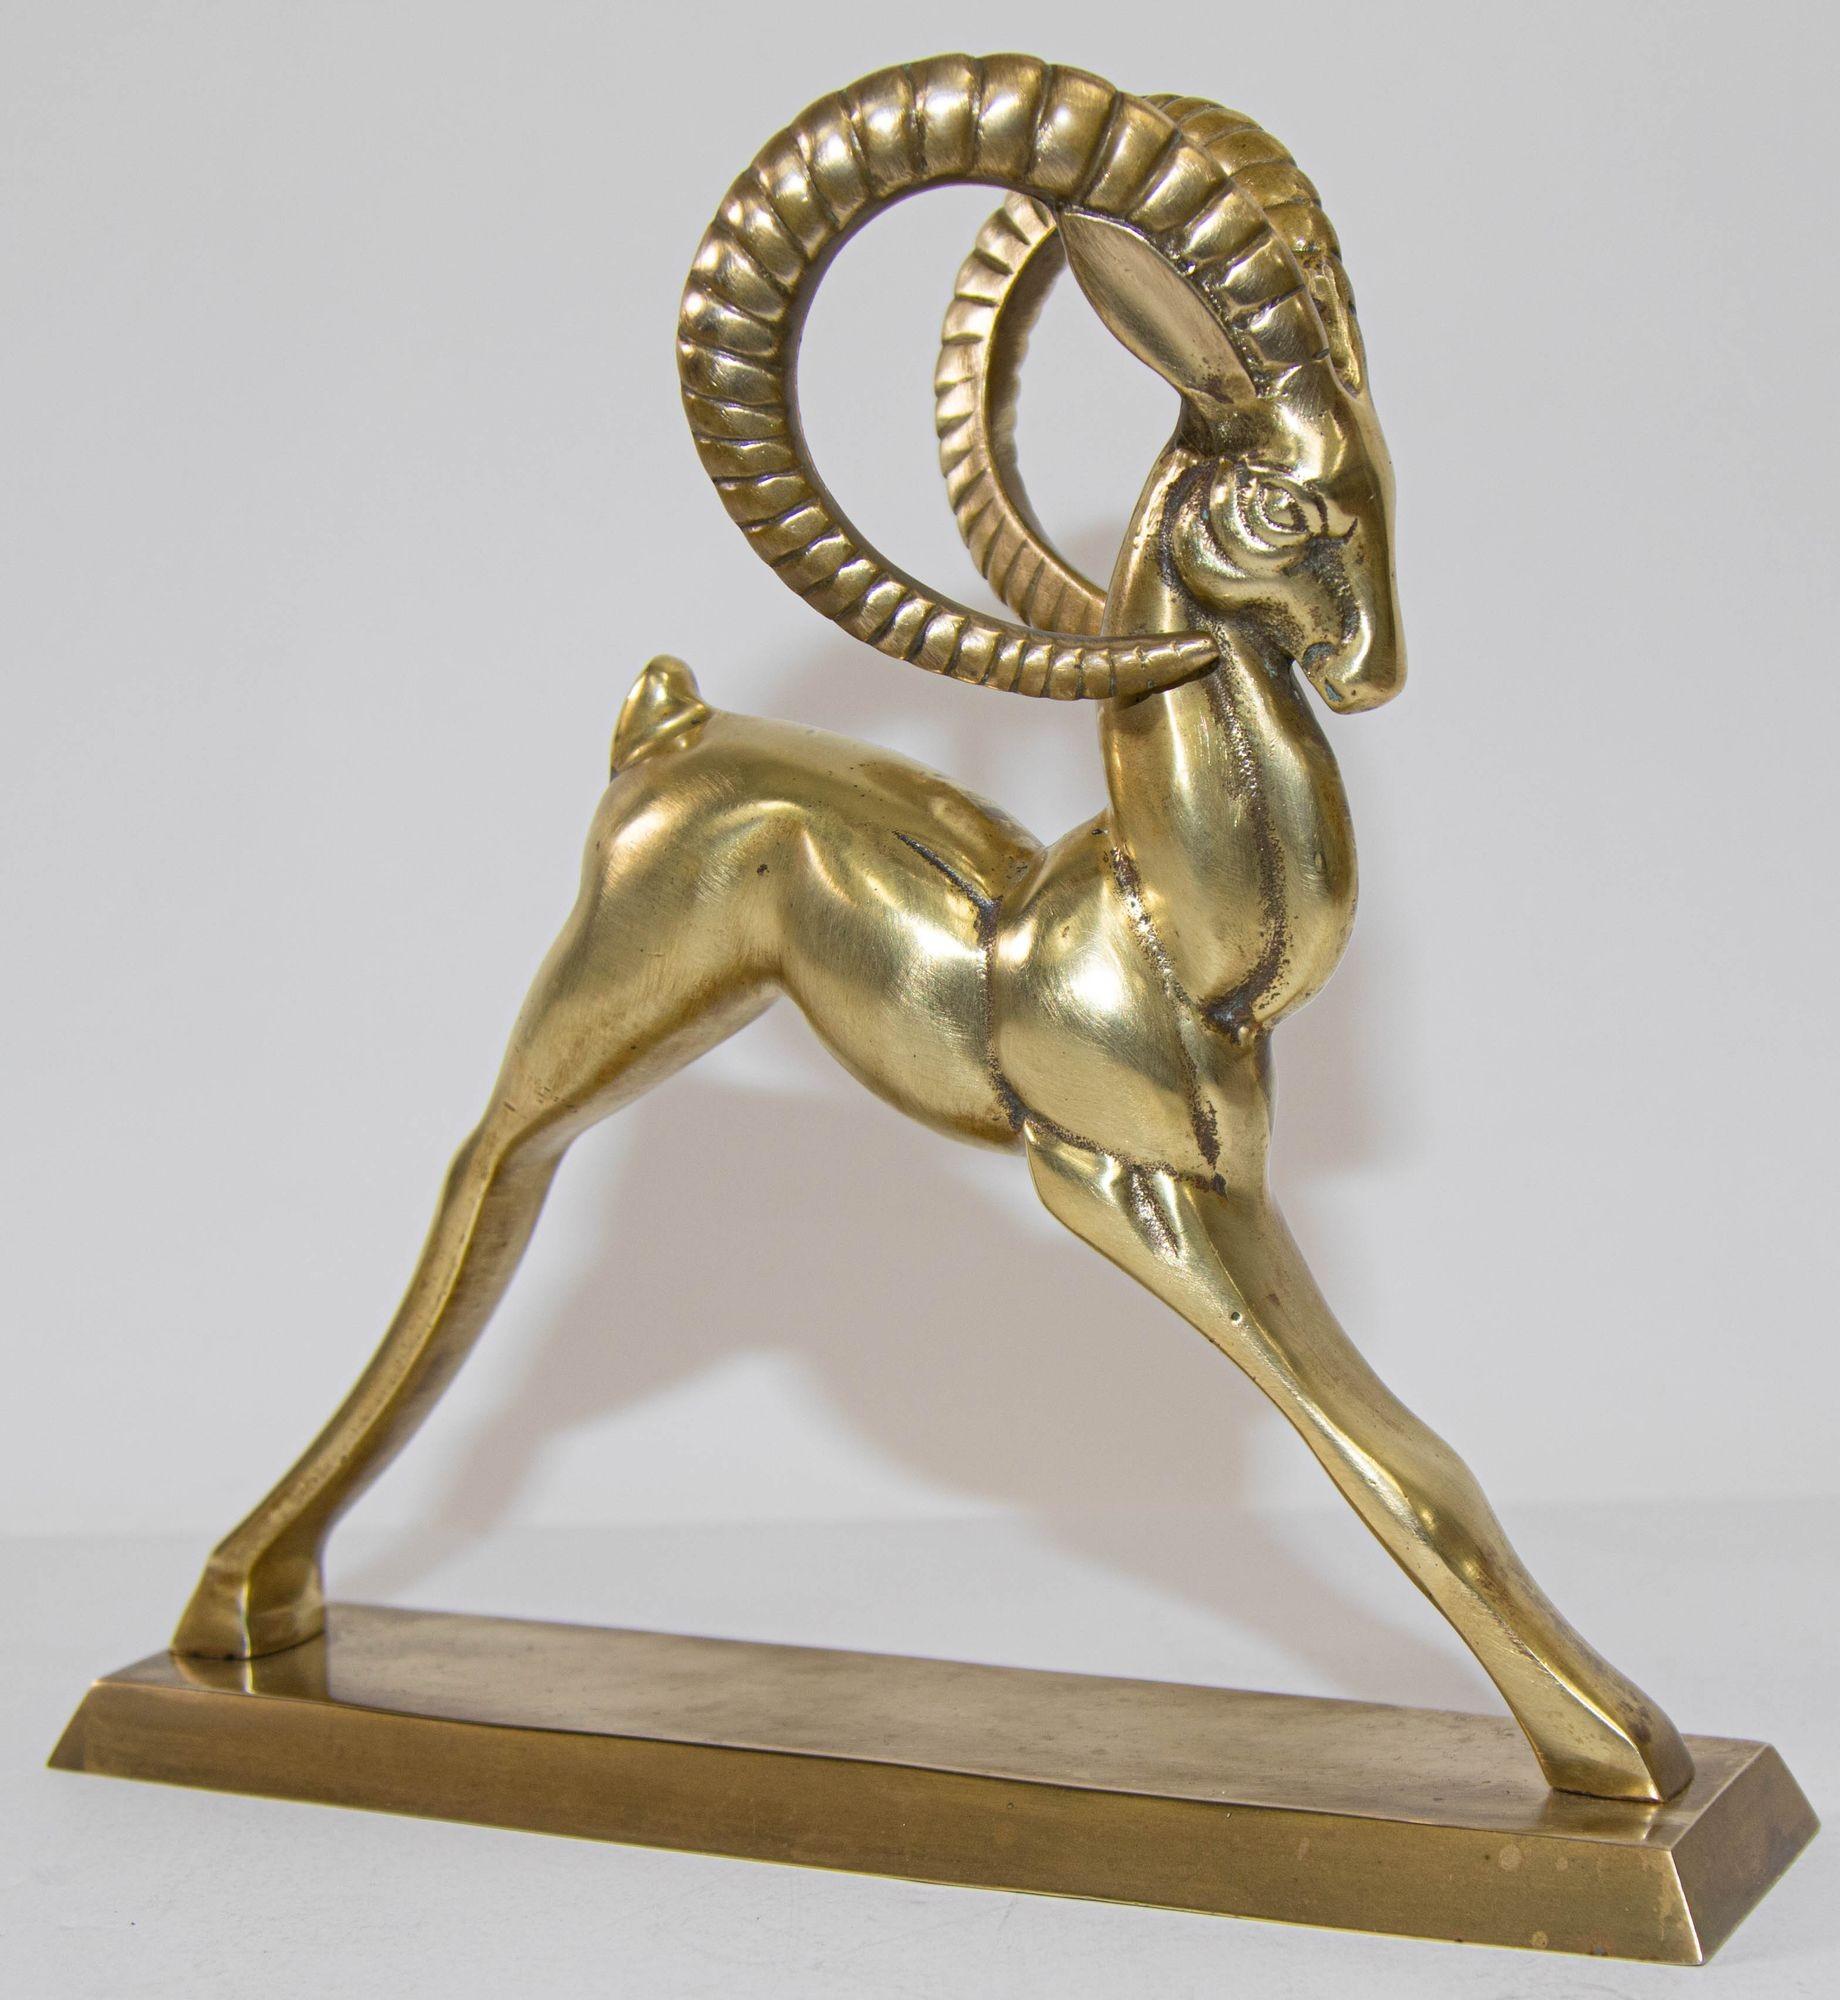 Hollywood Regency Vintage French Art Deco Style Sculpture of Brass Ibex Antelope